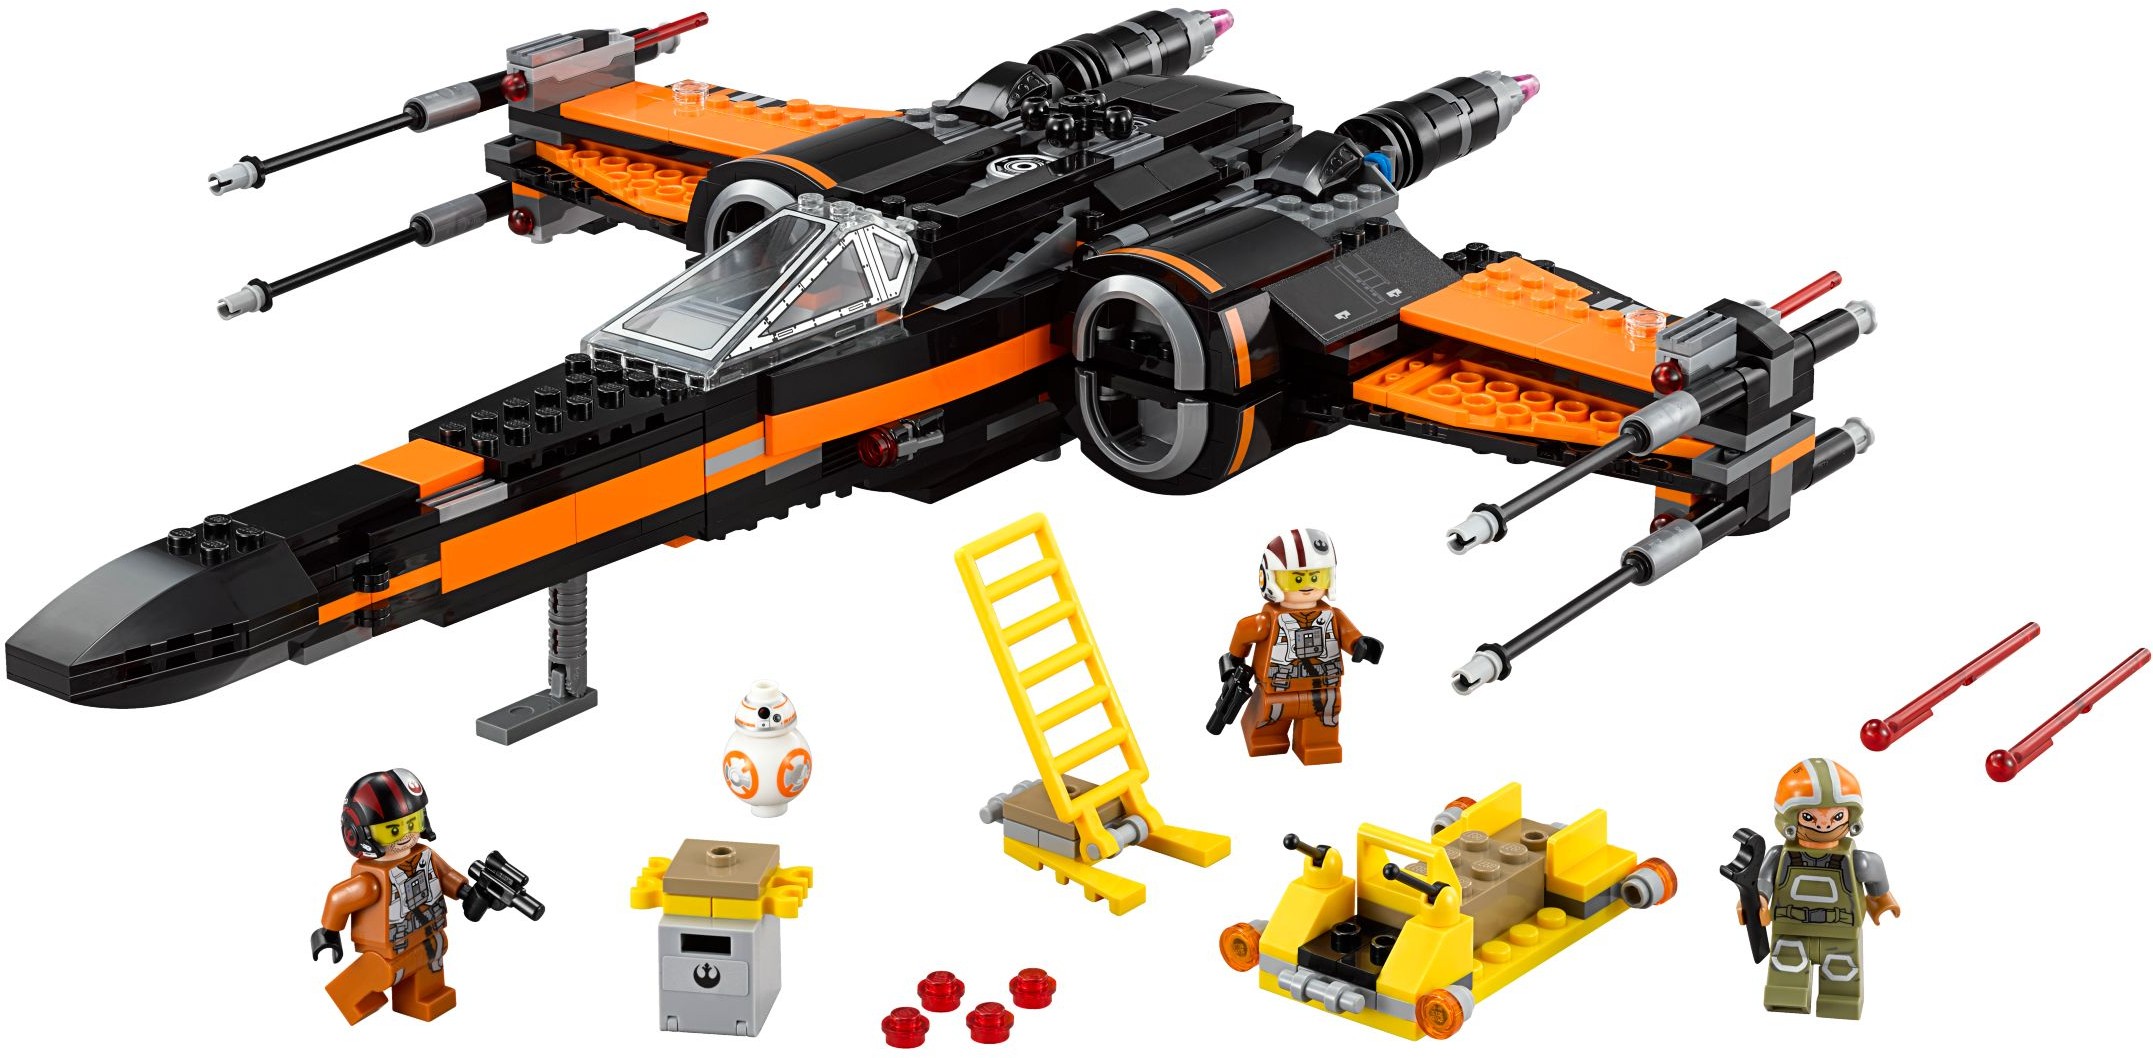 LEGO Star Wars Poe's X-Wing Fighter (75102) - $79.99